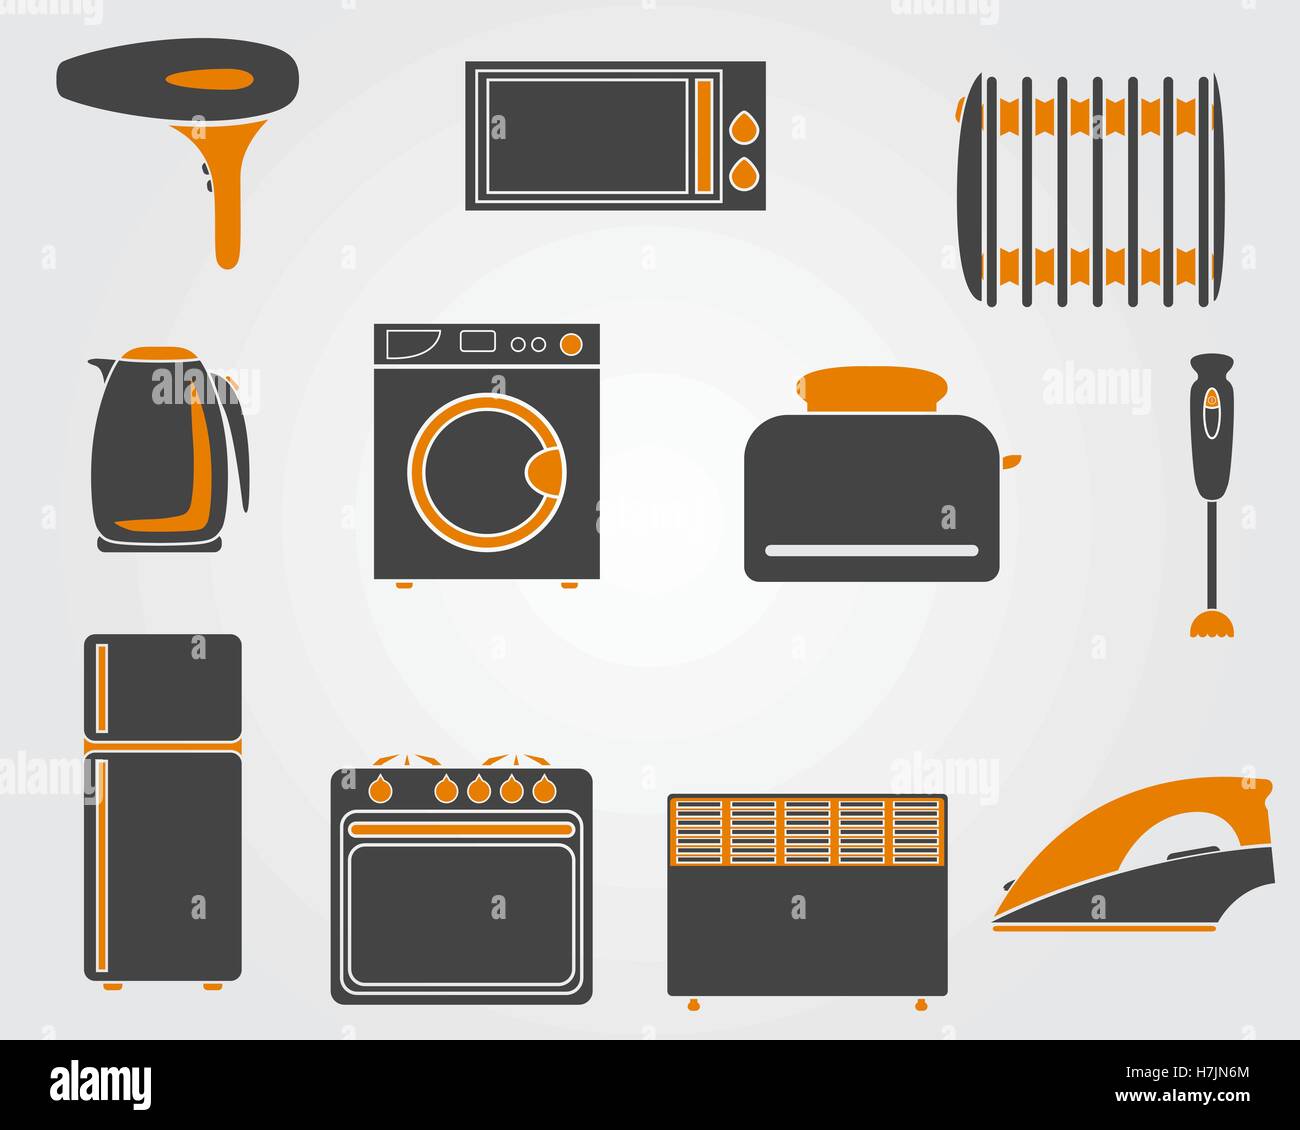 Set of simple kitchen icons in yellow and black colors. Stock Vector